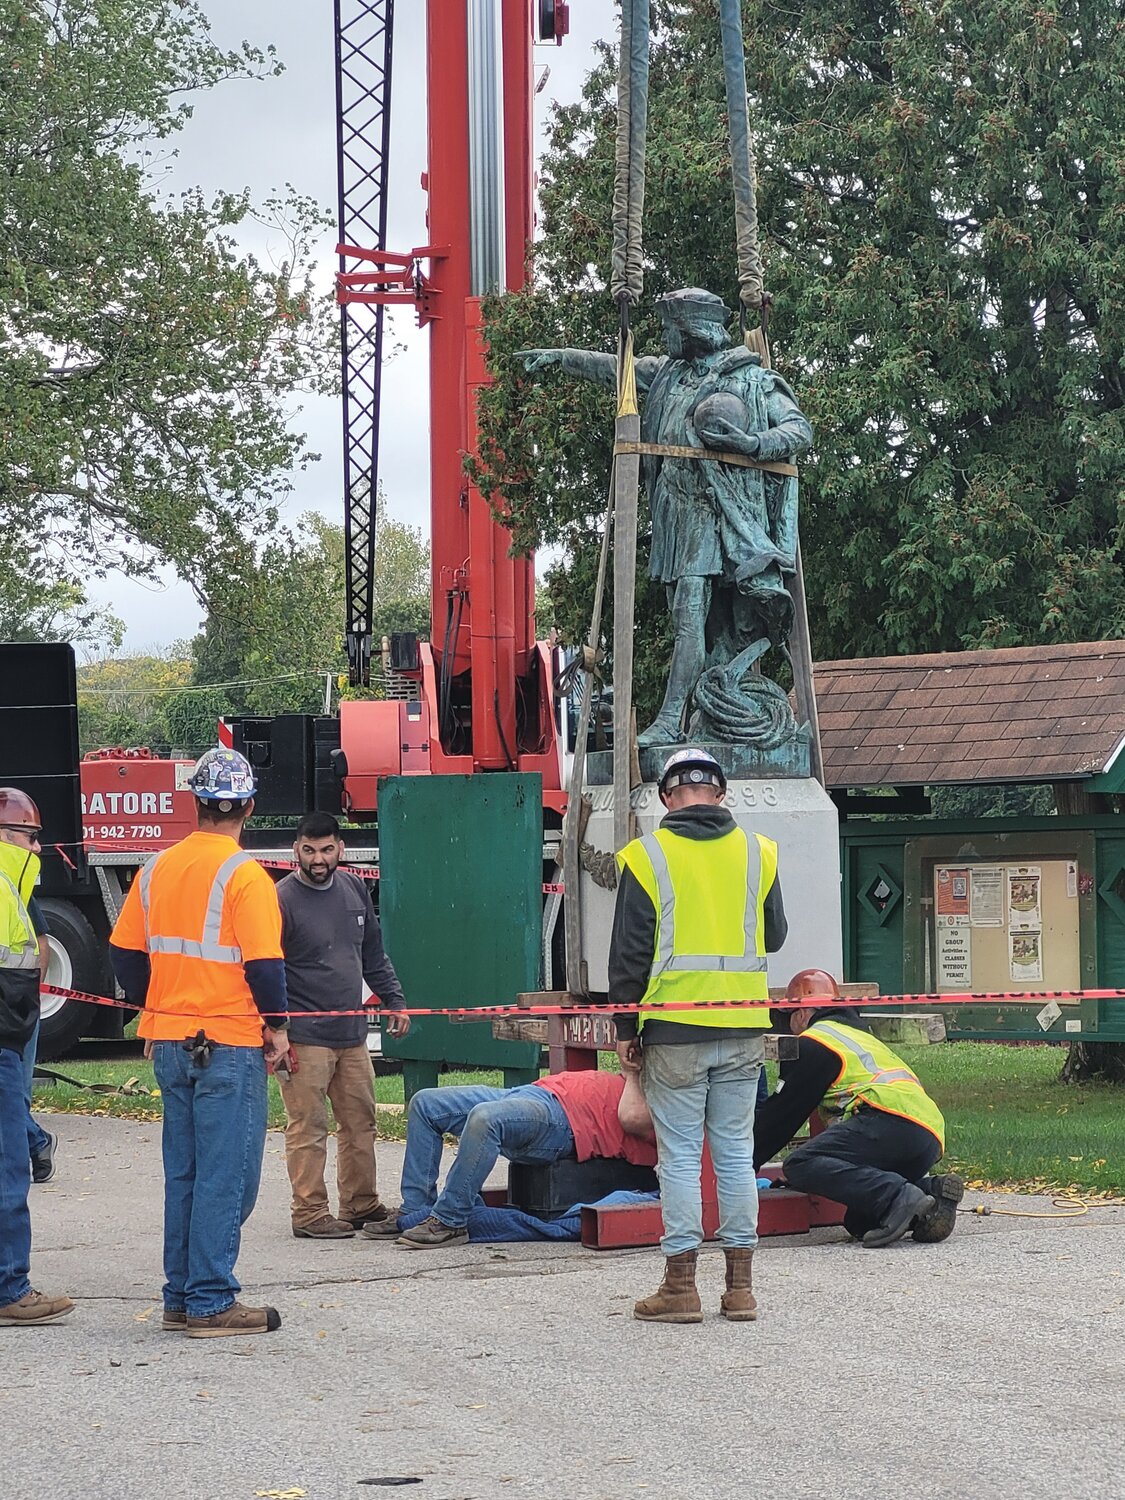 COLUMBUS BY CRANE: The Christopher Columbus statue that stood in Providence for 130 years has been erected on a cement pedestal on the island in the center of Johnston’s War Memorial Park pond. The mayor has planned a Columbus Day unveiling event.